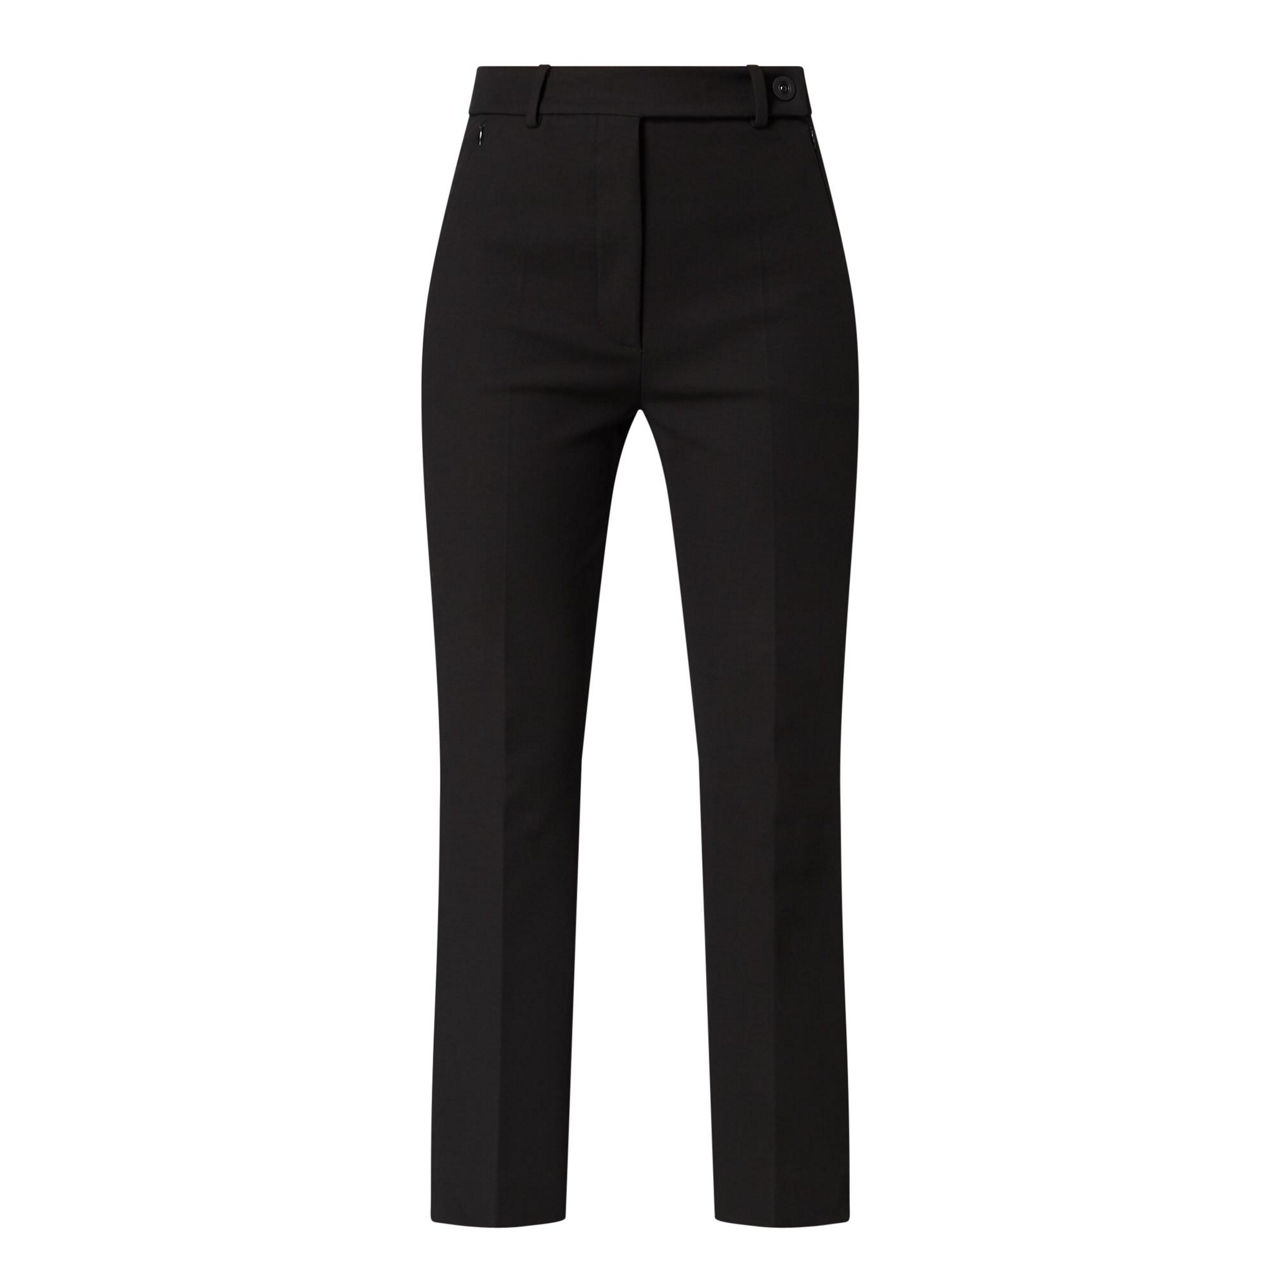 COMMAS Black Tailored Trousers